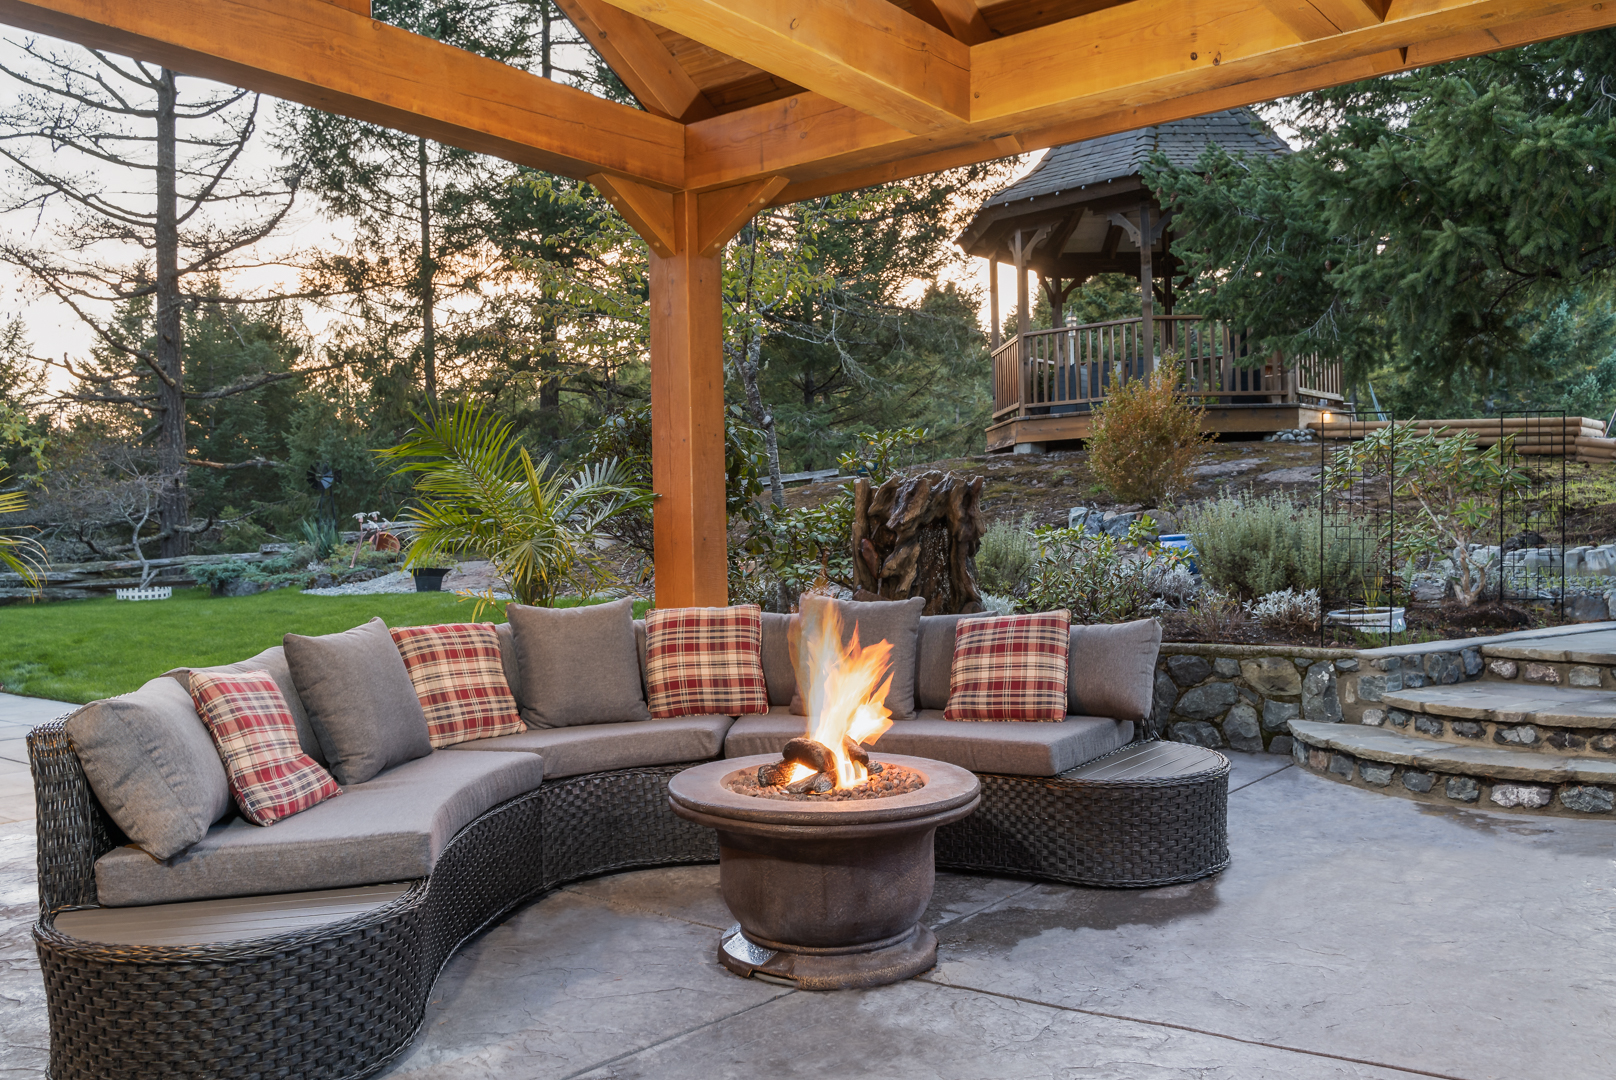 Outdoor seating area with fire pit and gazebo in background